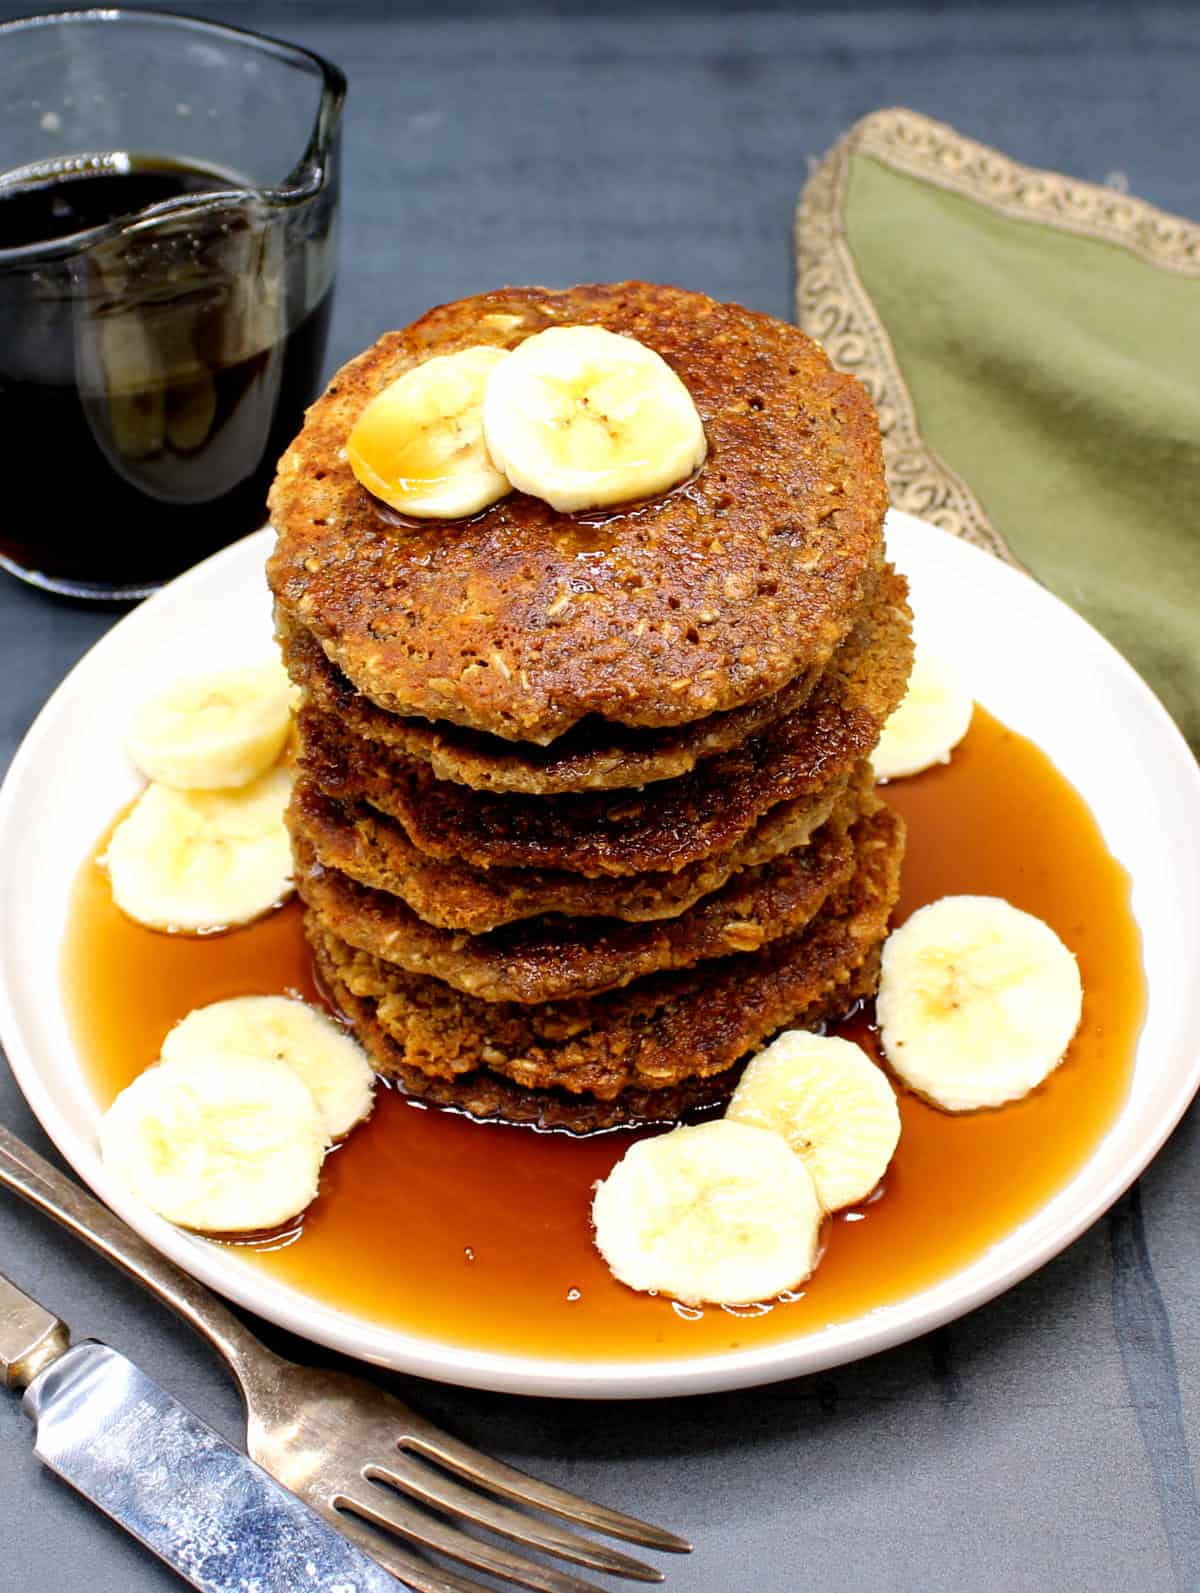 Oatmeal pancakes in plate with maple syrup and banana slices.